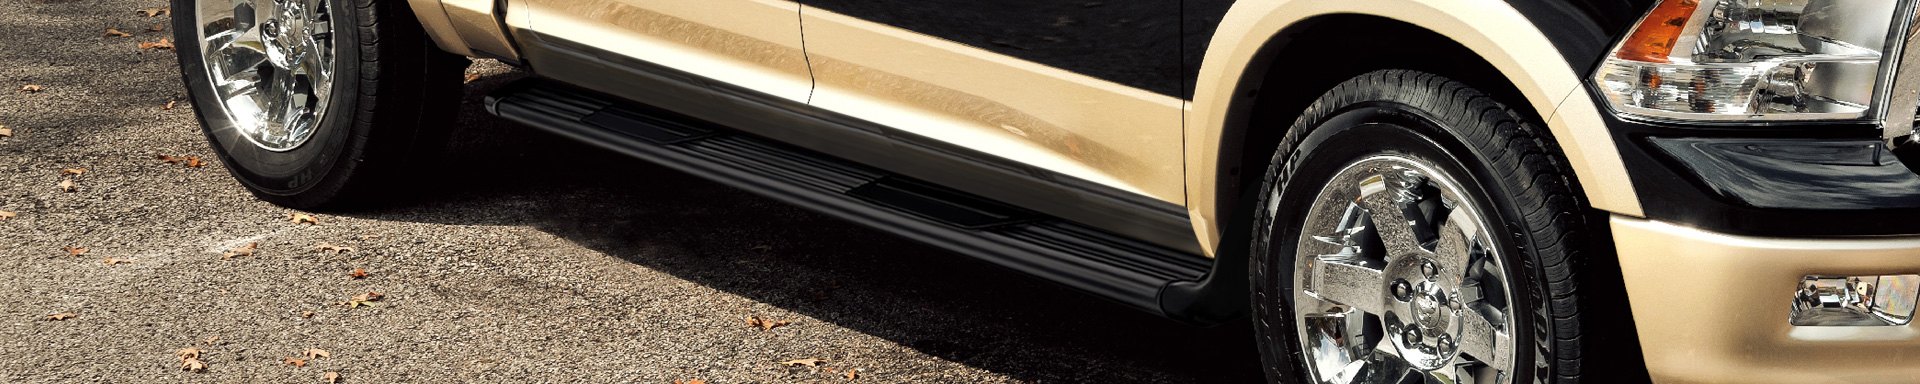 Spice Up Your Ram’s Exterior With All-New Stylish & Functional Dee Zee Running Boards